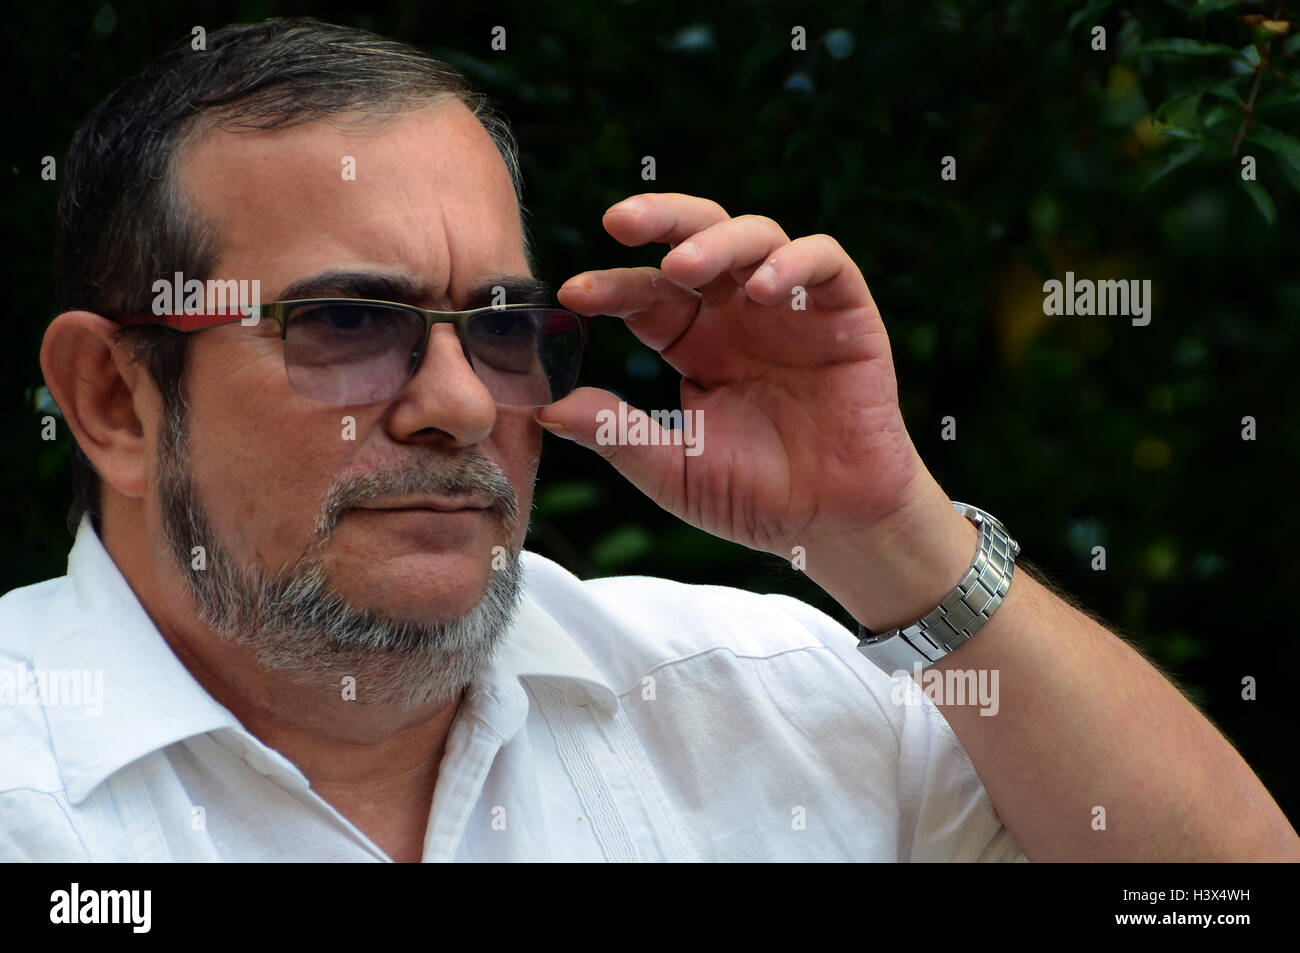 Havana, Cuba. 11th Oct, 2016. Top leader of the Revolutionary Armed Forces of Colombia (FARC) Rodrigo Londono, also known as Timoleon Jimenez, gestures during an exclusive interview with Xinhua in Havana, Cuba, Oct. 11, 2016. FARC is willing to talk with different political sectors to enrich the peace agreement which he and Colombian President Juan Manuel Santos have signed, Rodrigo Londono said, refusing to renegotiate the agreement. © Joaquin Hernandez/Xinhua/Alamy Live News Stock Photo